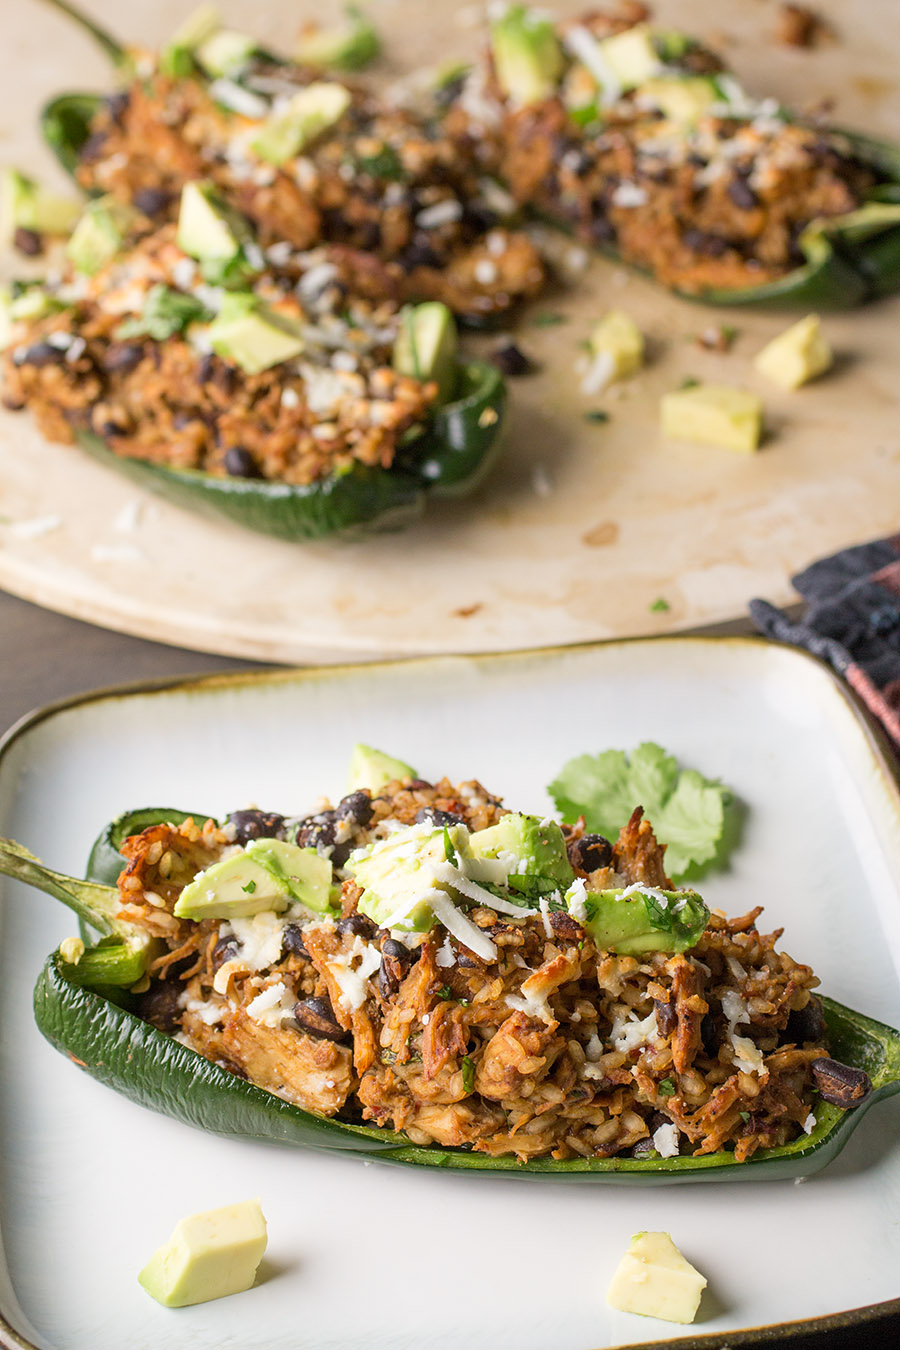 One of the Chicken and Black Bean Stuffed Poblano Peppers on the plate